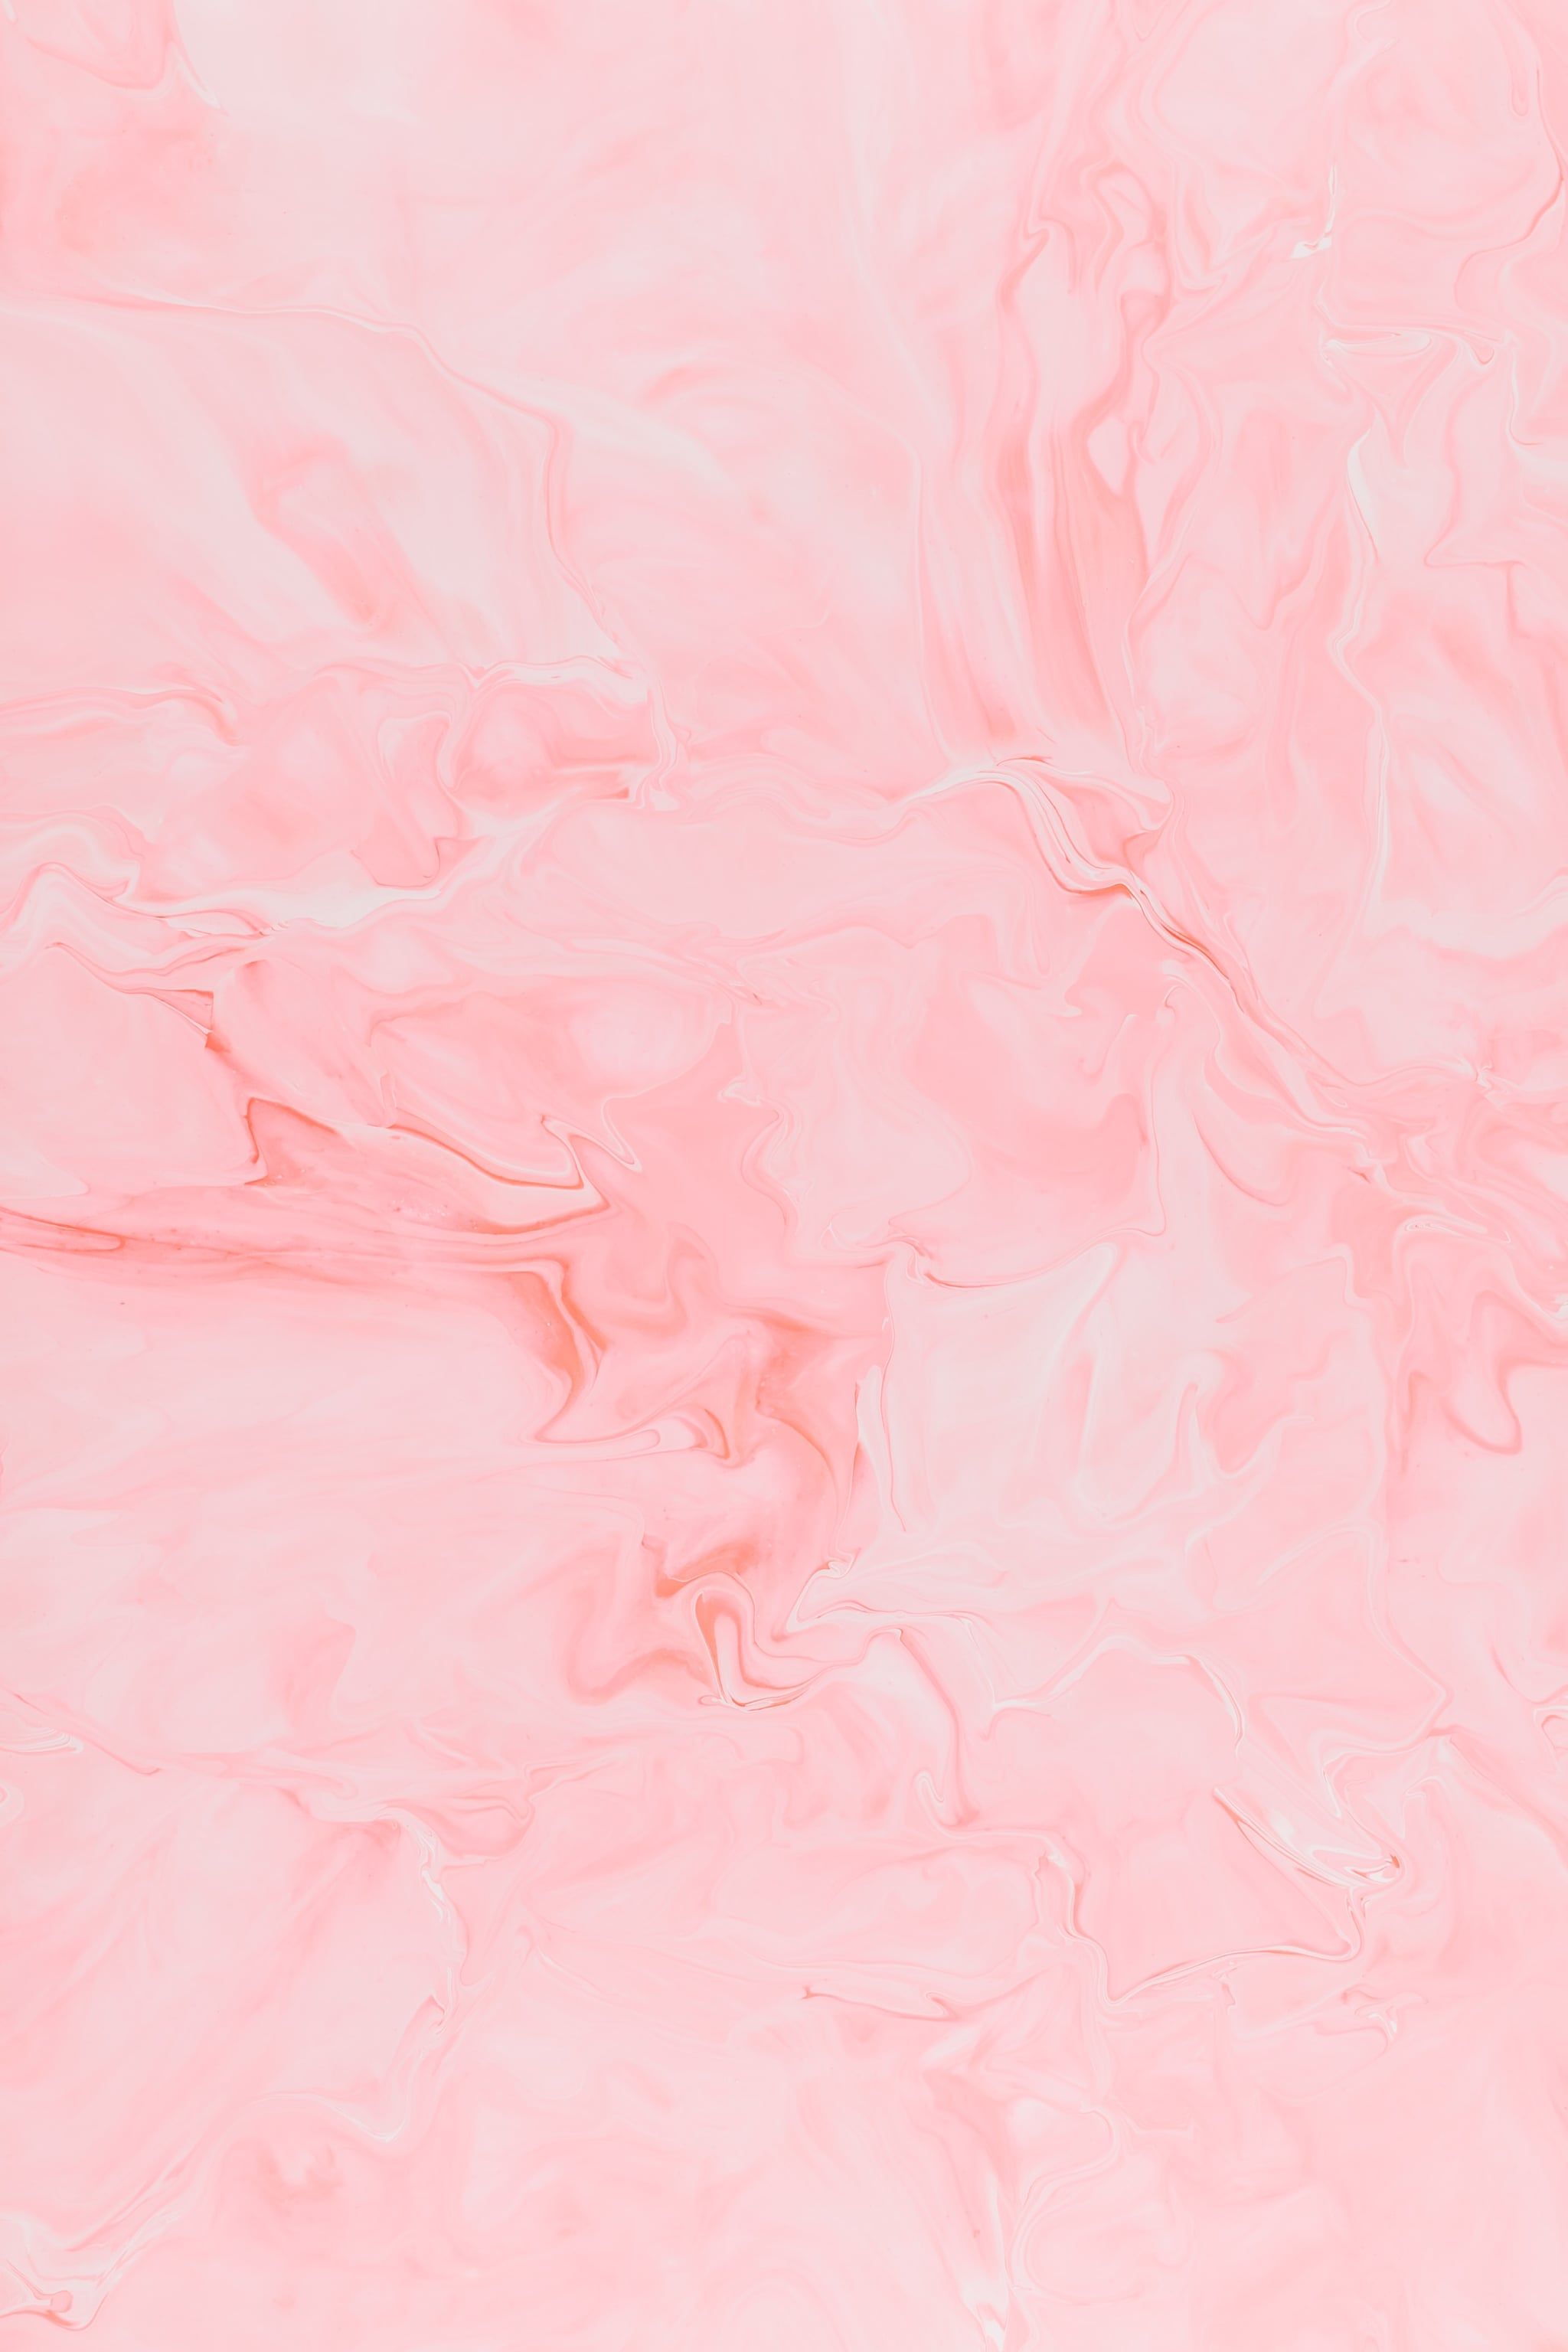 Valentine's Day Wallpaper: Pastel Marble Pink. The Dreamiest iPhone Wallpaper For Valentine's Day That Fit Any Aesthetic